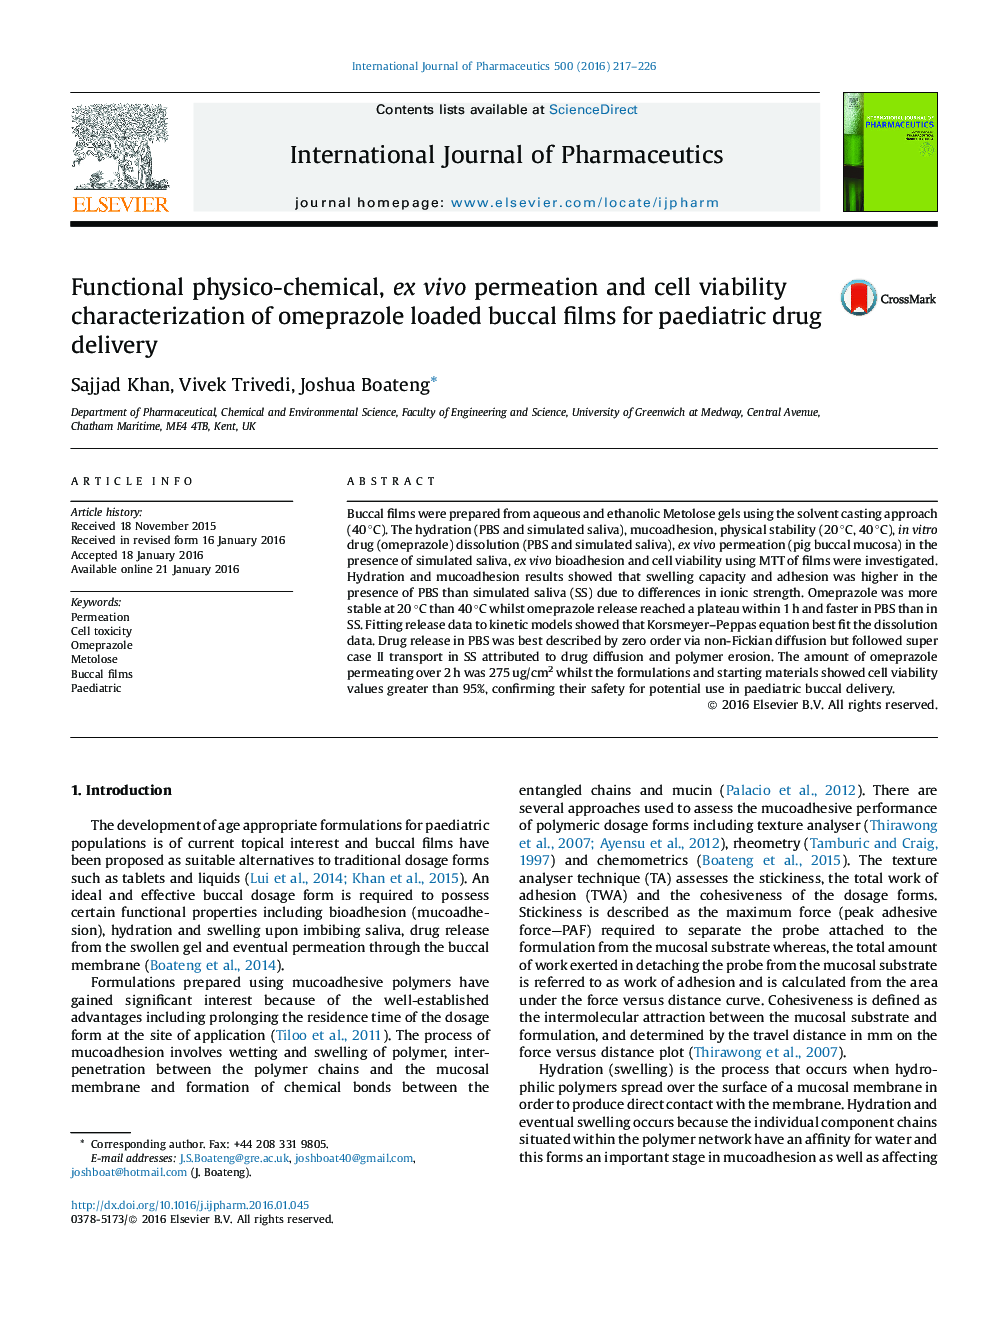 Functional physico-chemical, ex vivo permeation and cell viability characterization of omeprazole loaded buccal films for paediatric drug delivery